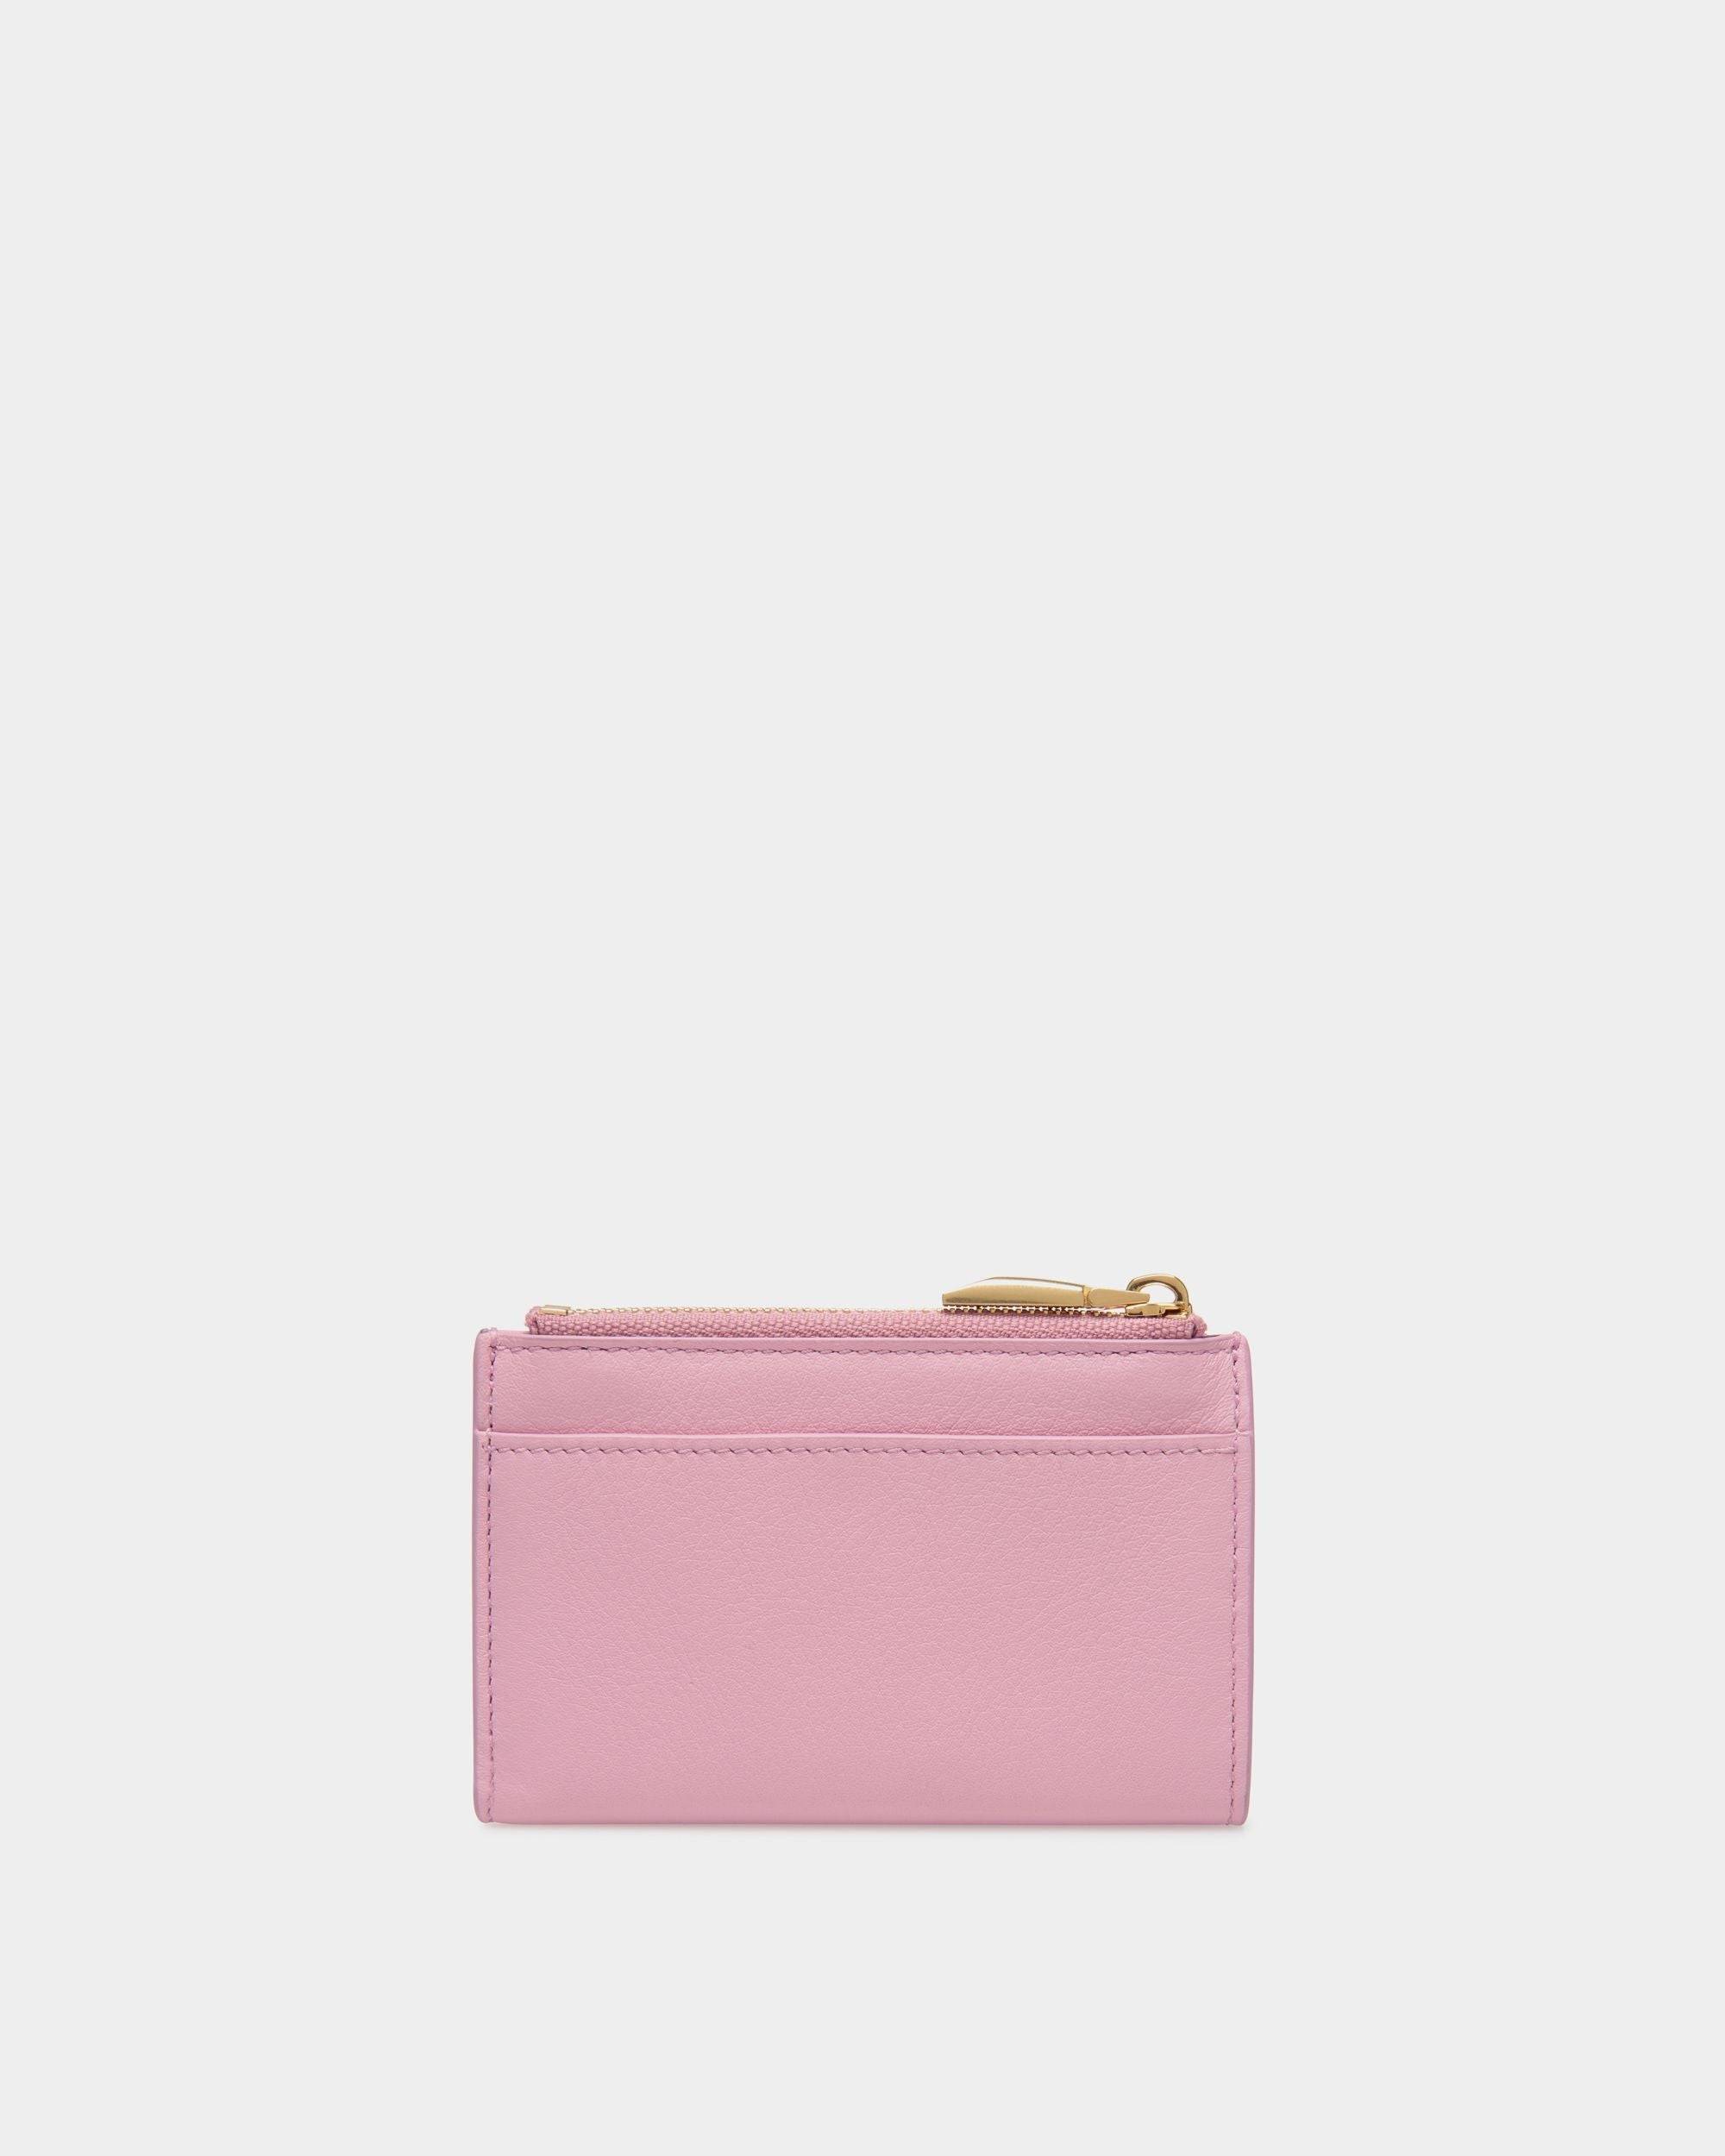 Bally Spell | Women's Wallet in Pink Leather | Bally | Still Life Back